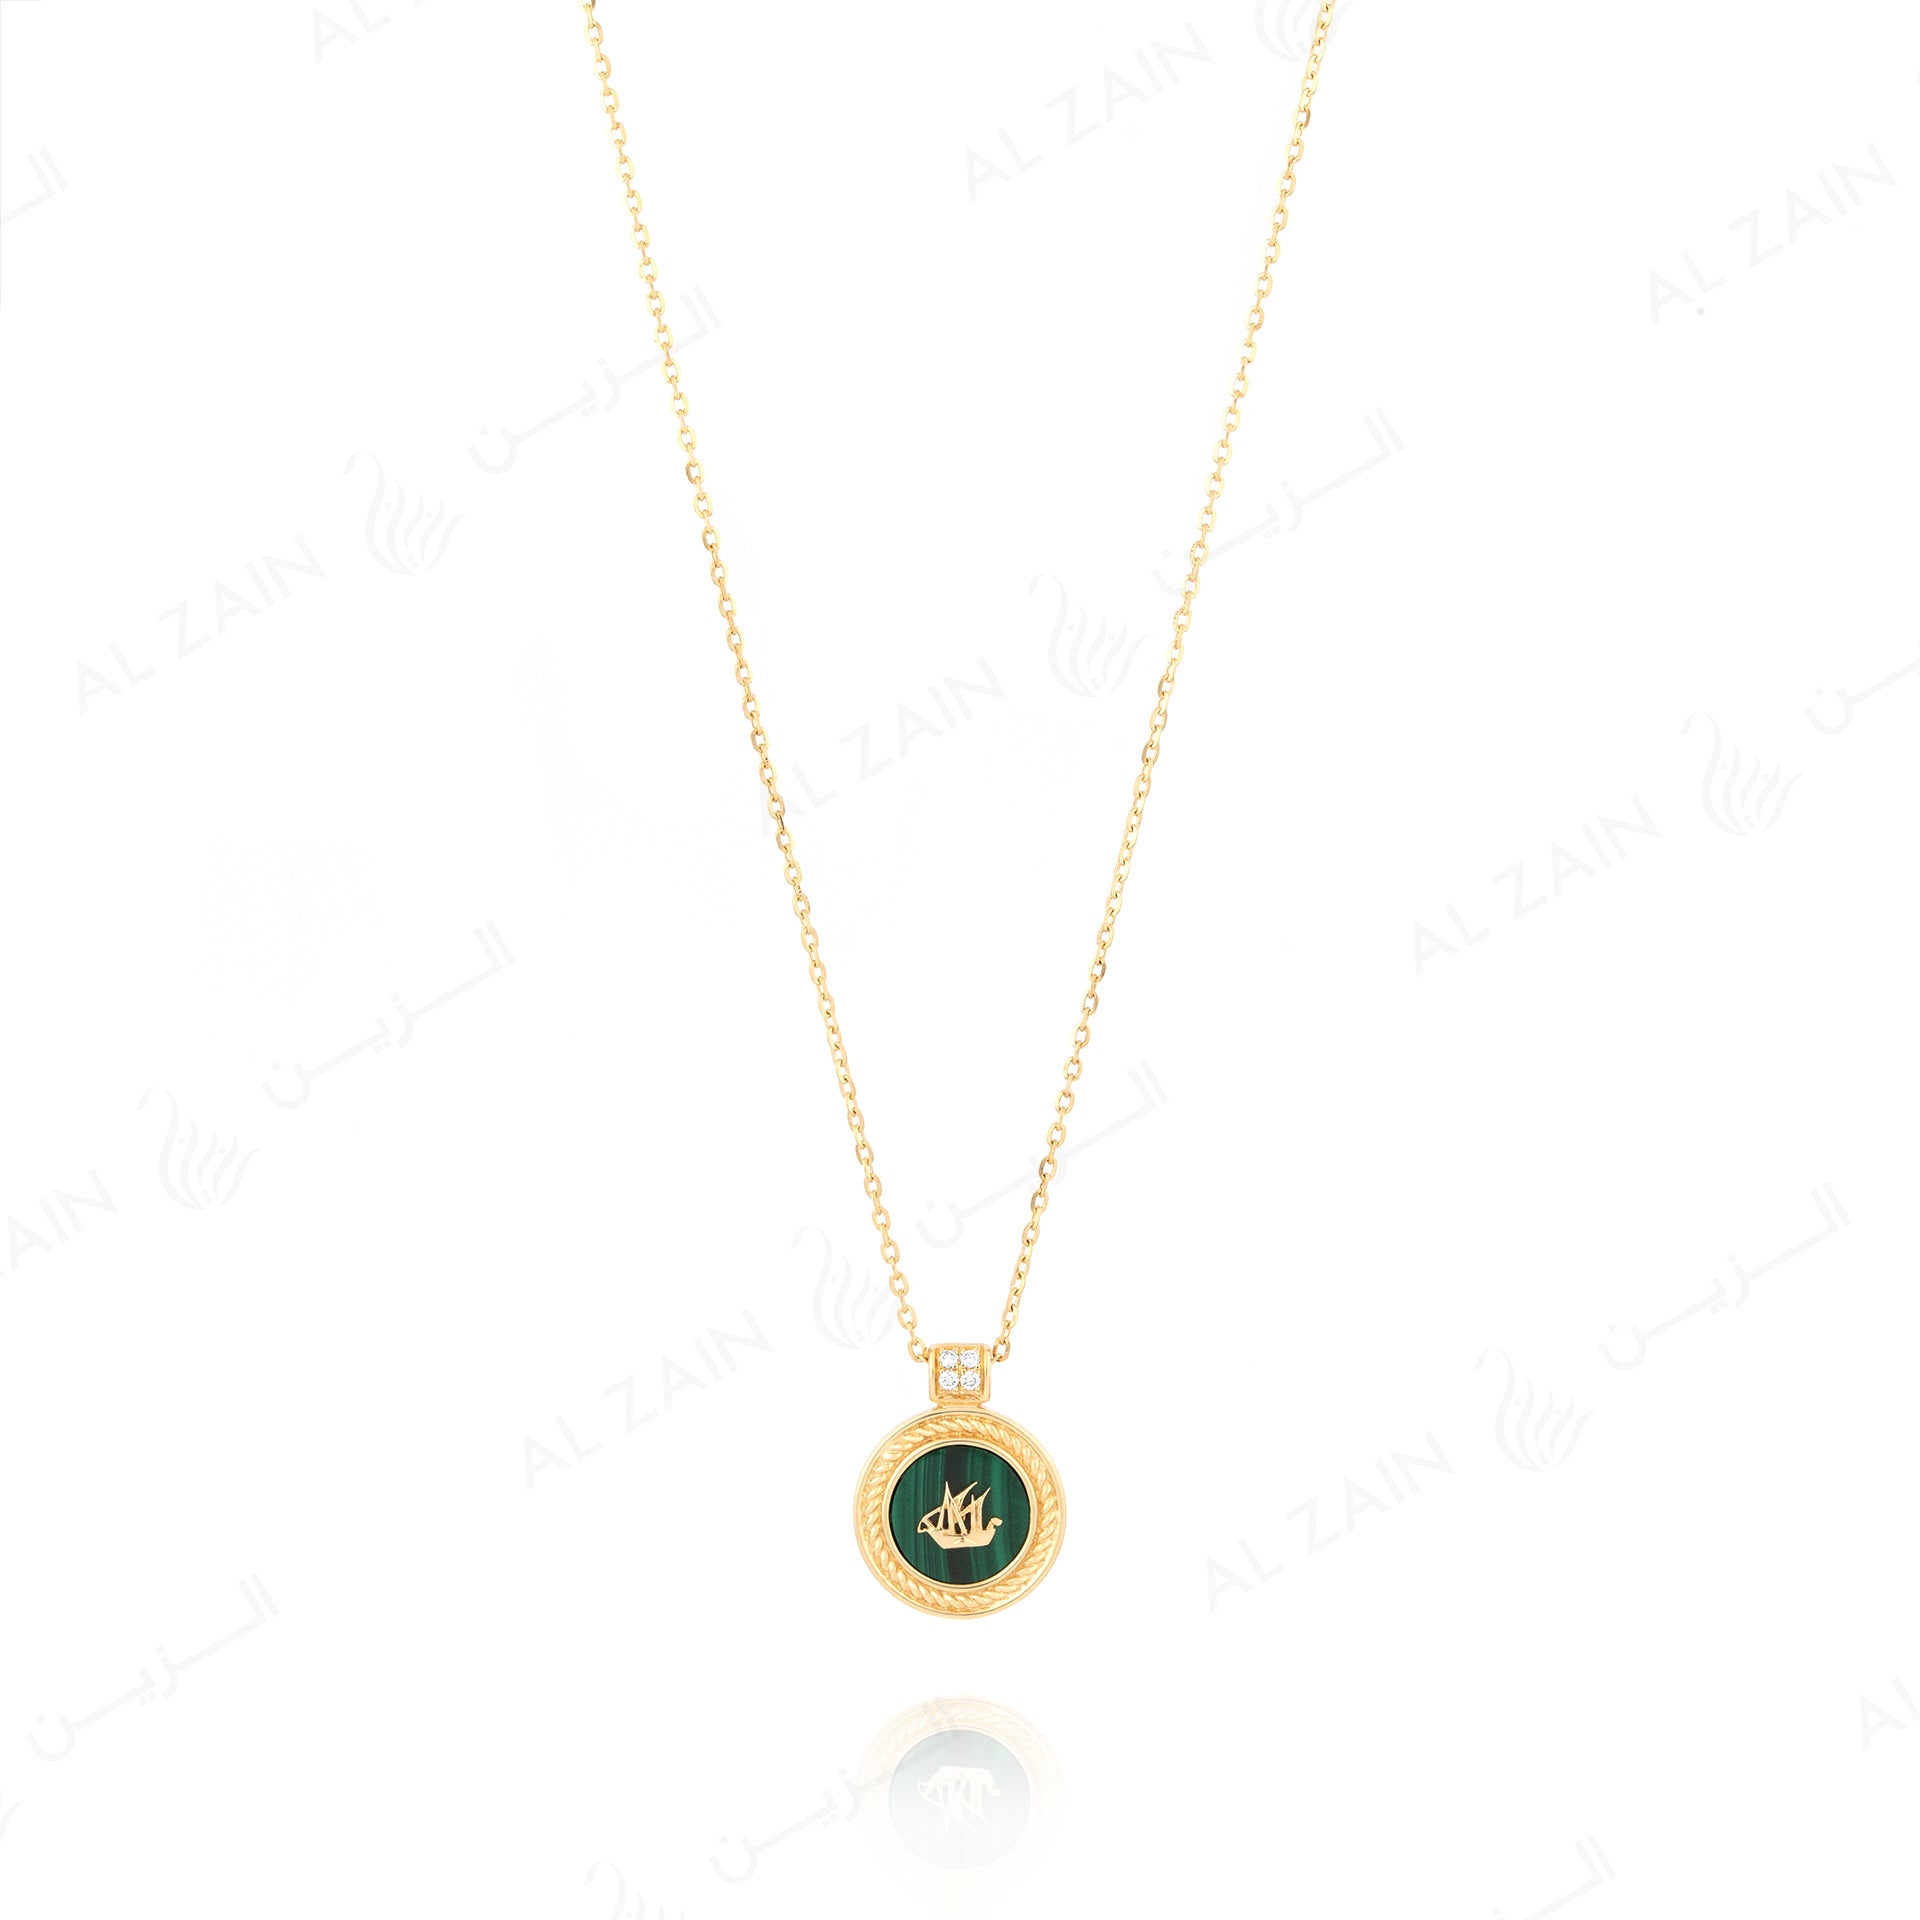 Kuwait Necklace in Yellow Gold with Malachite and diamonds